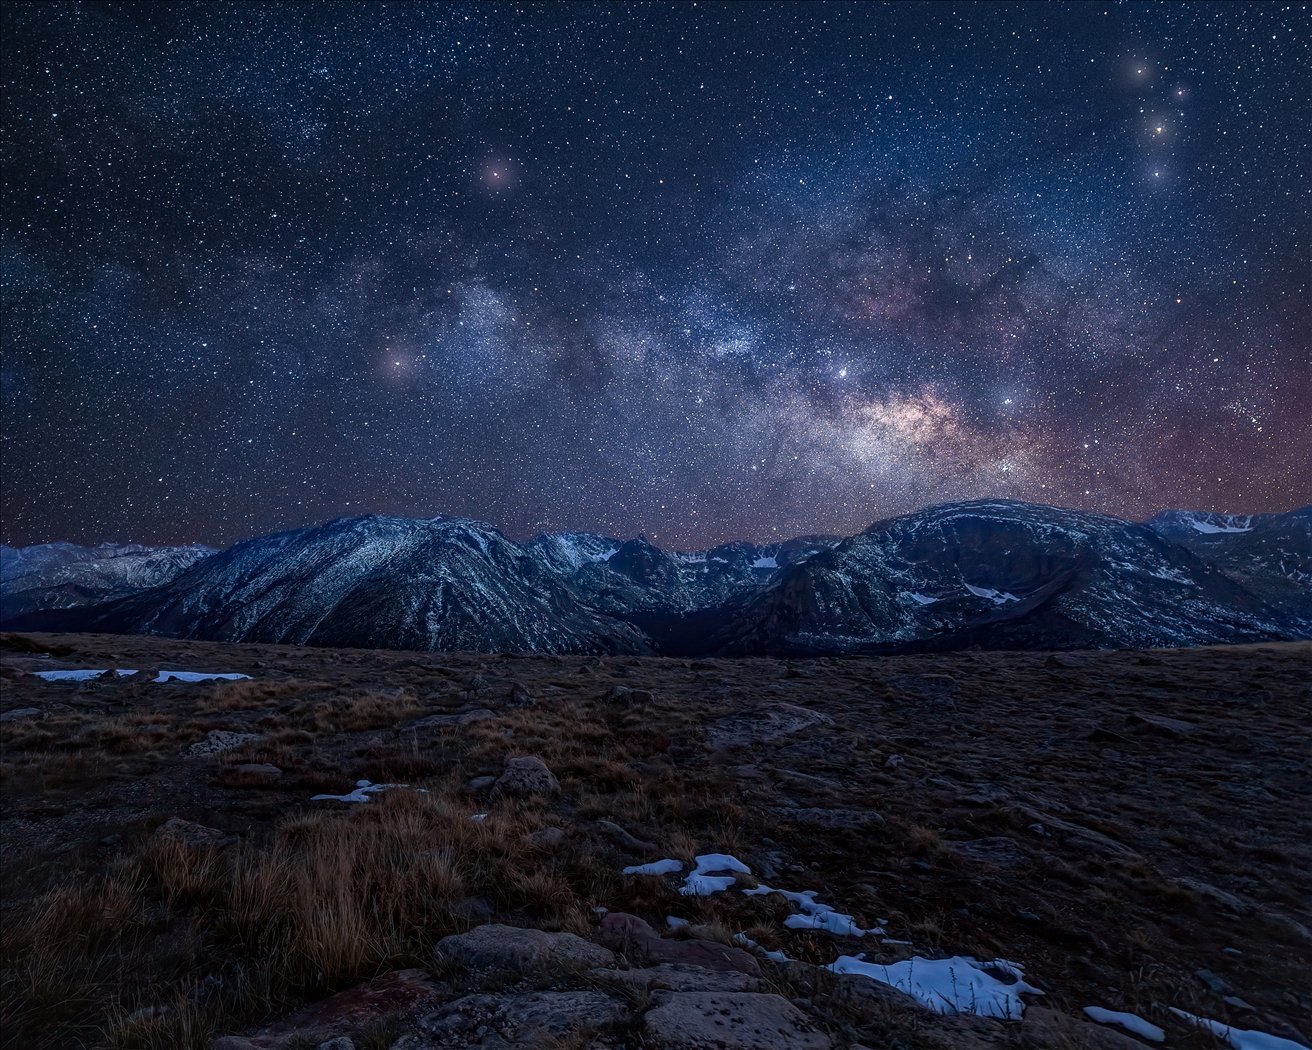 Rocky Mountain Milky Way, Michelle Esclovon, Beaumont Camera Club, 2nd Place